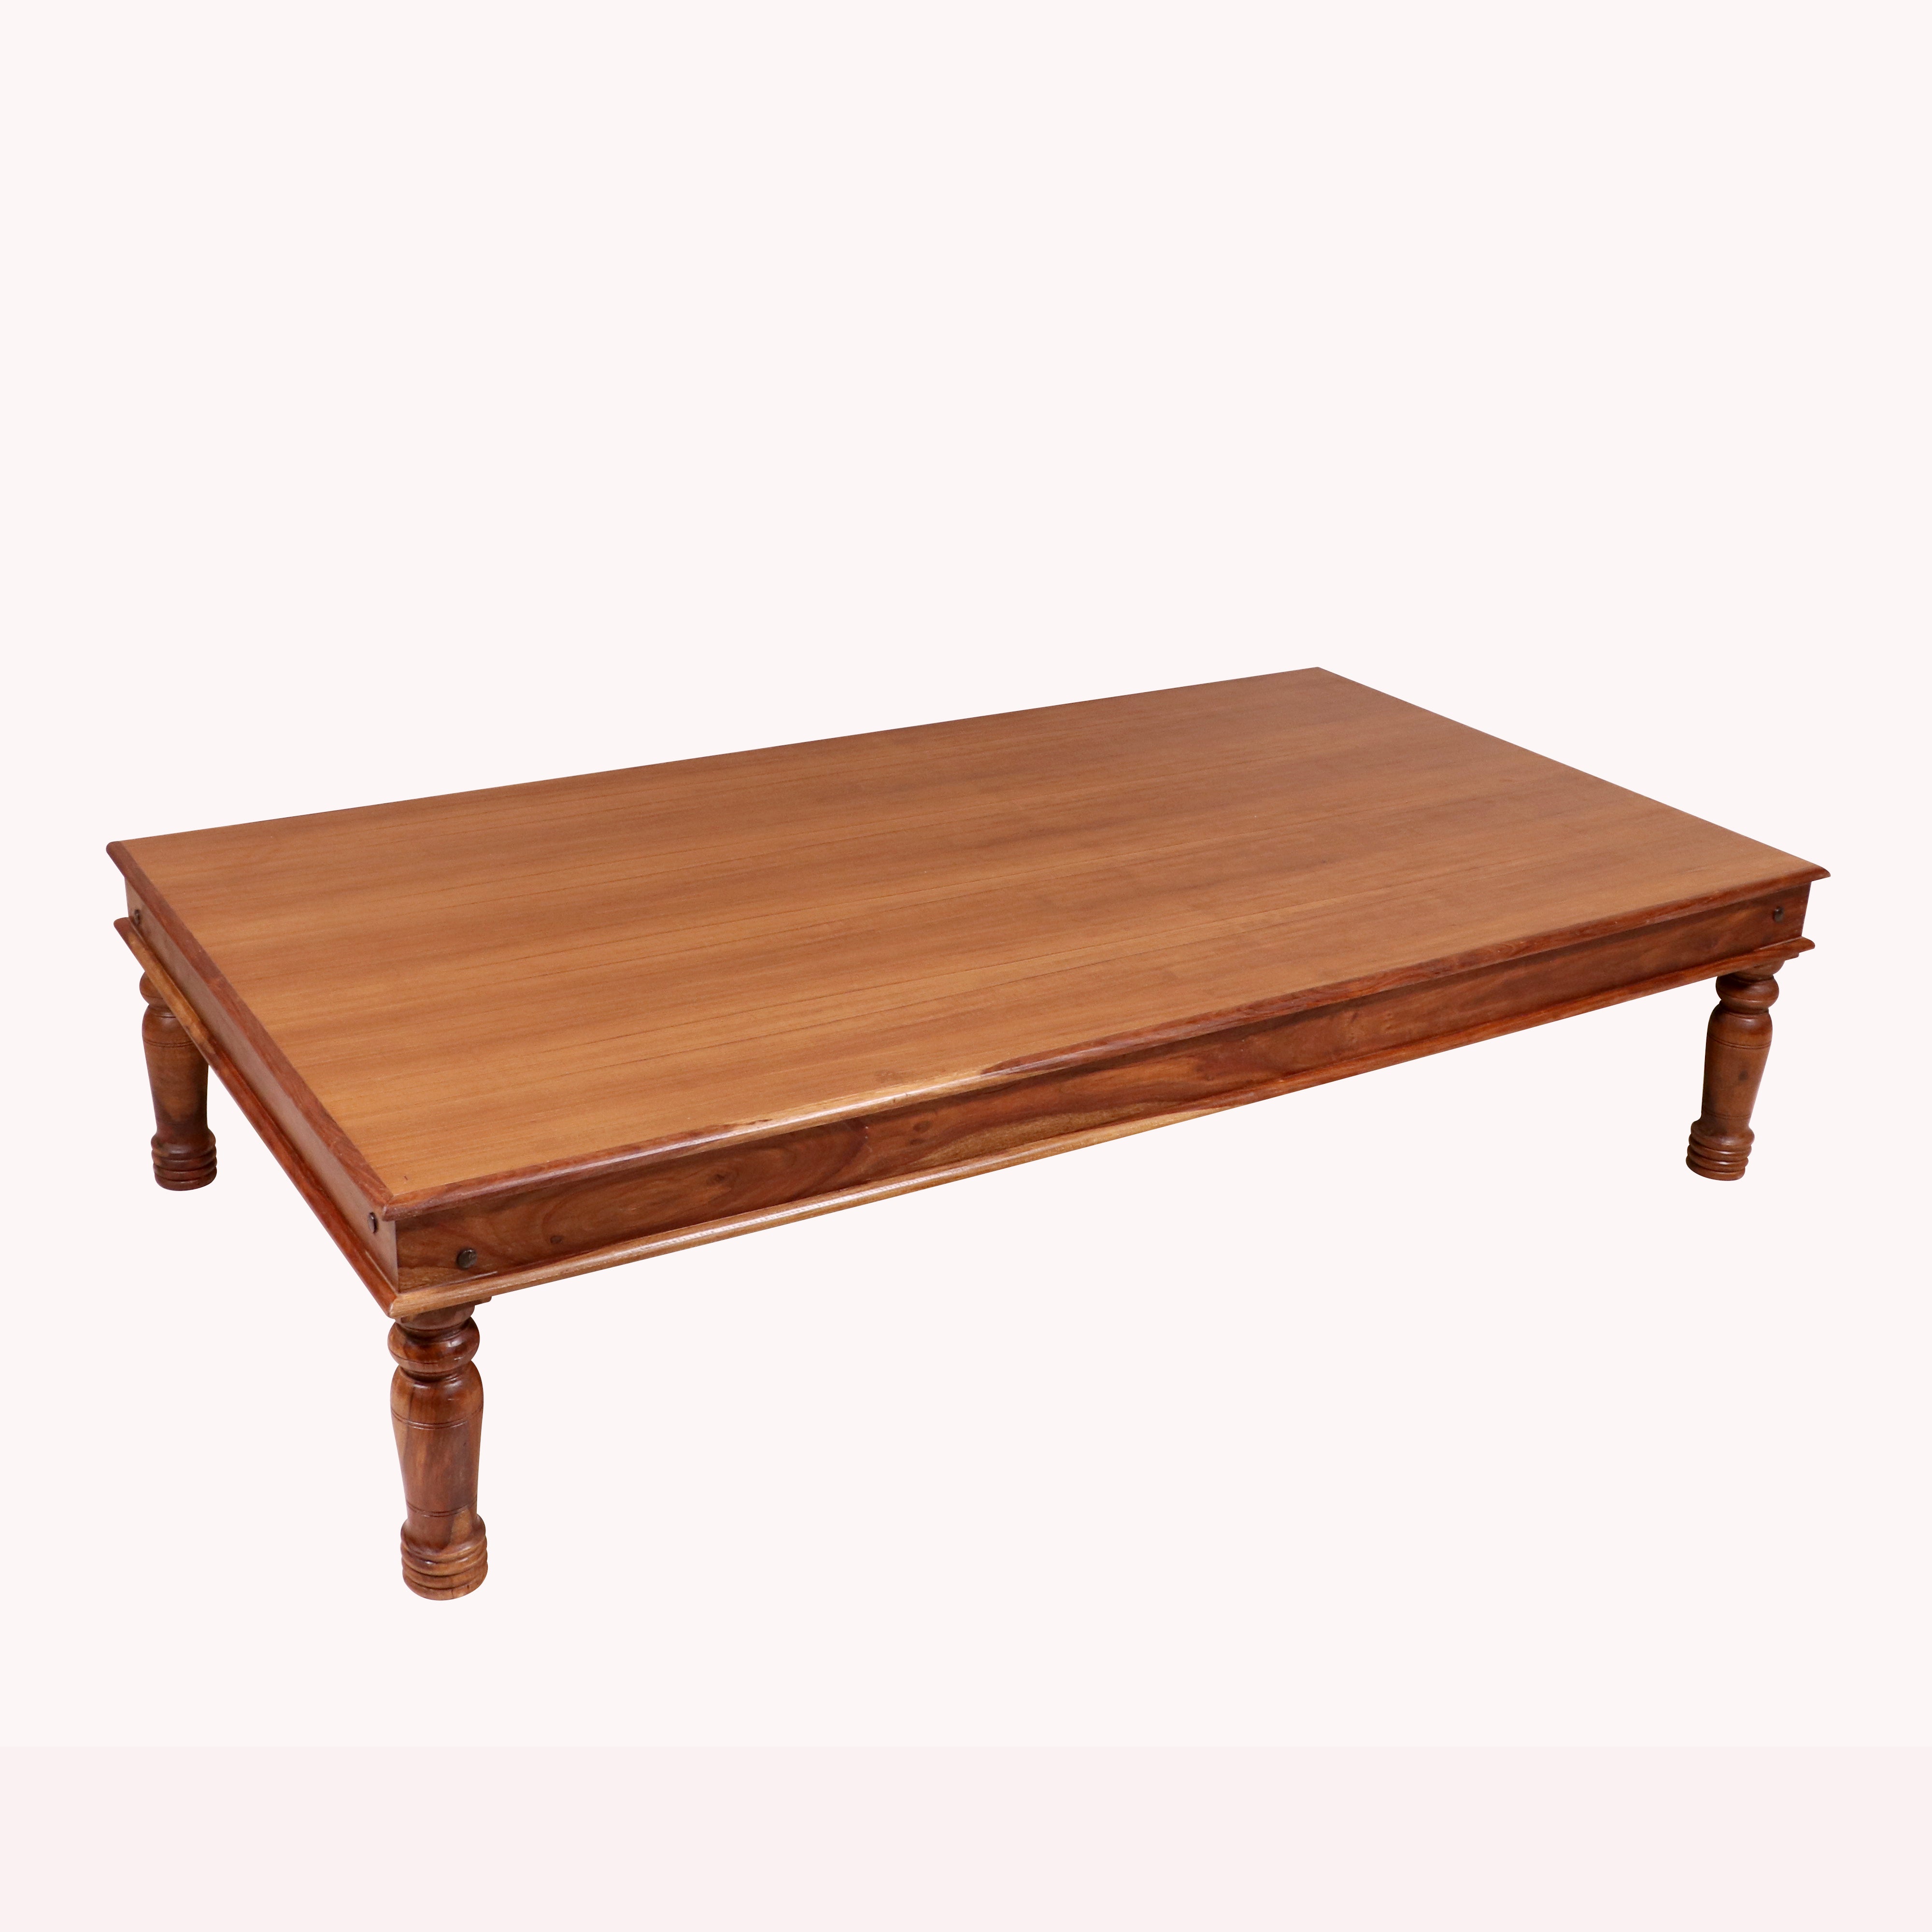 Sheesham wood Round legs with veneer Classical indian Paat Daybed